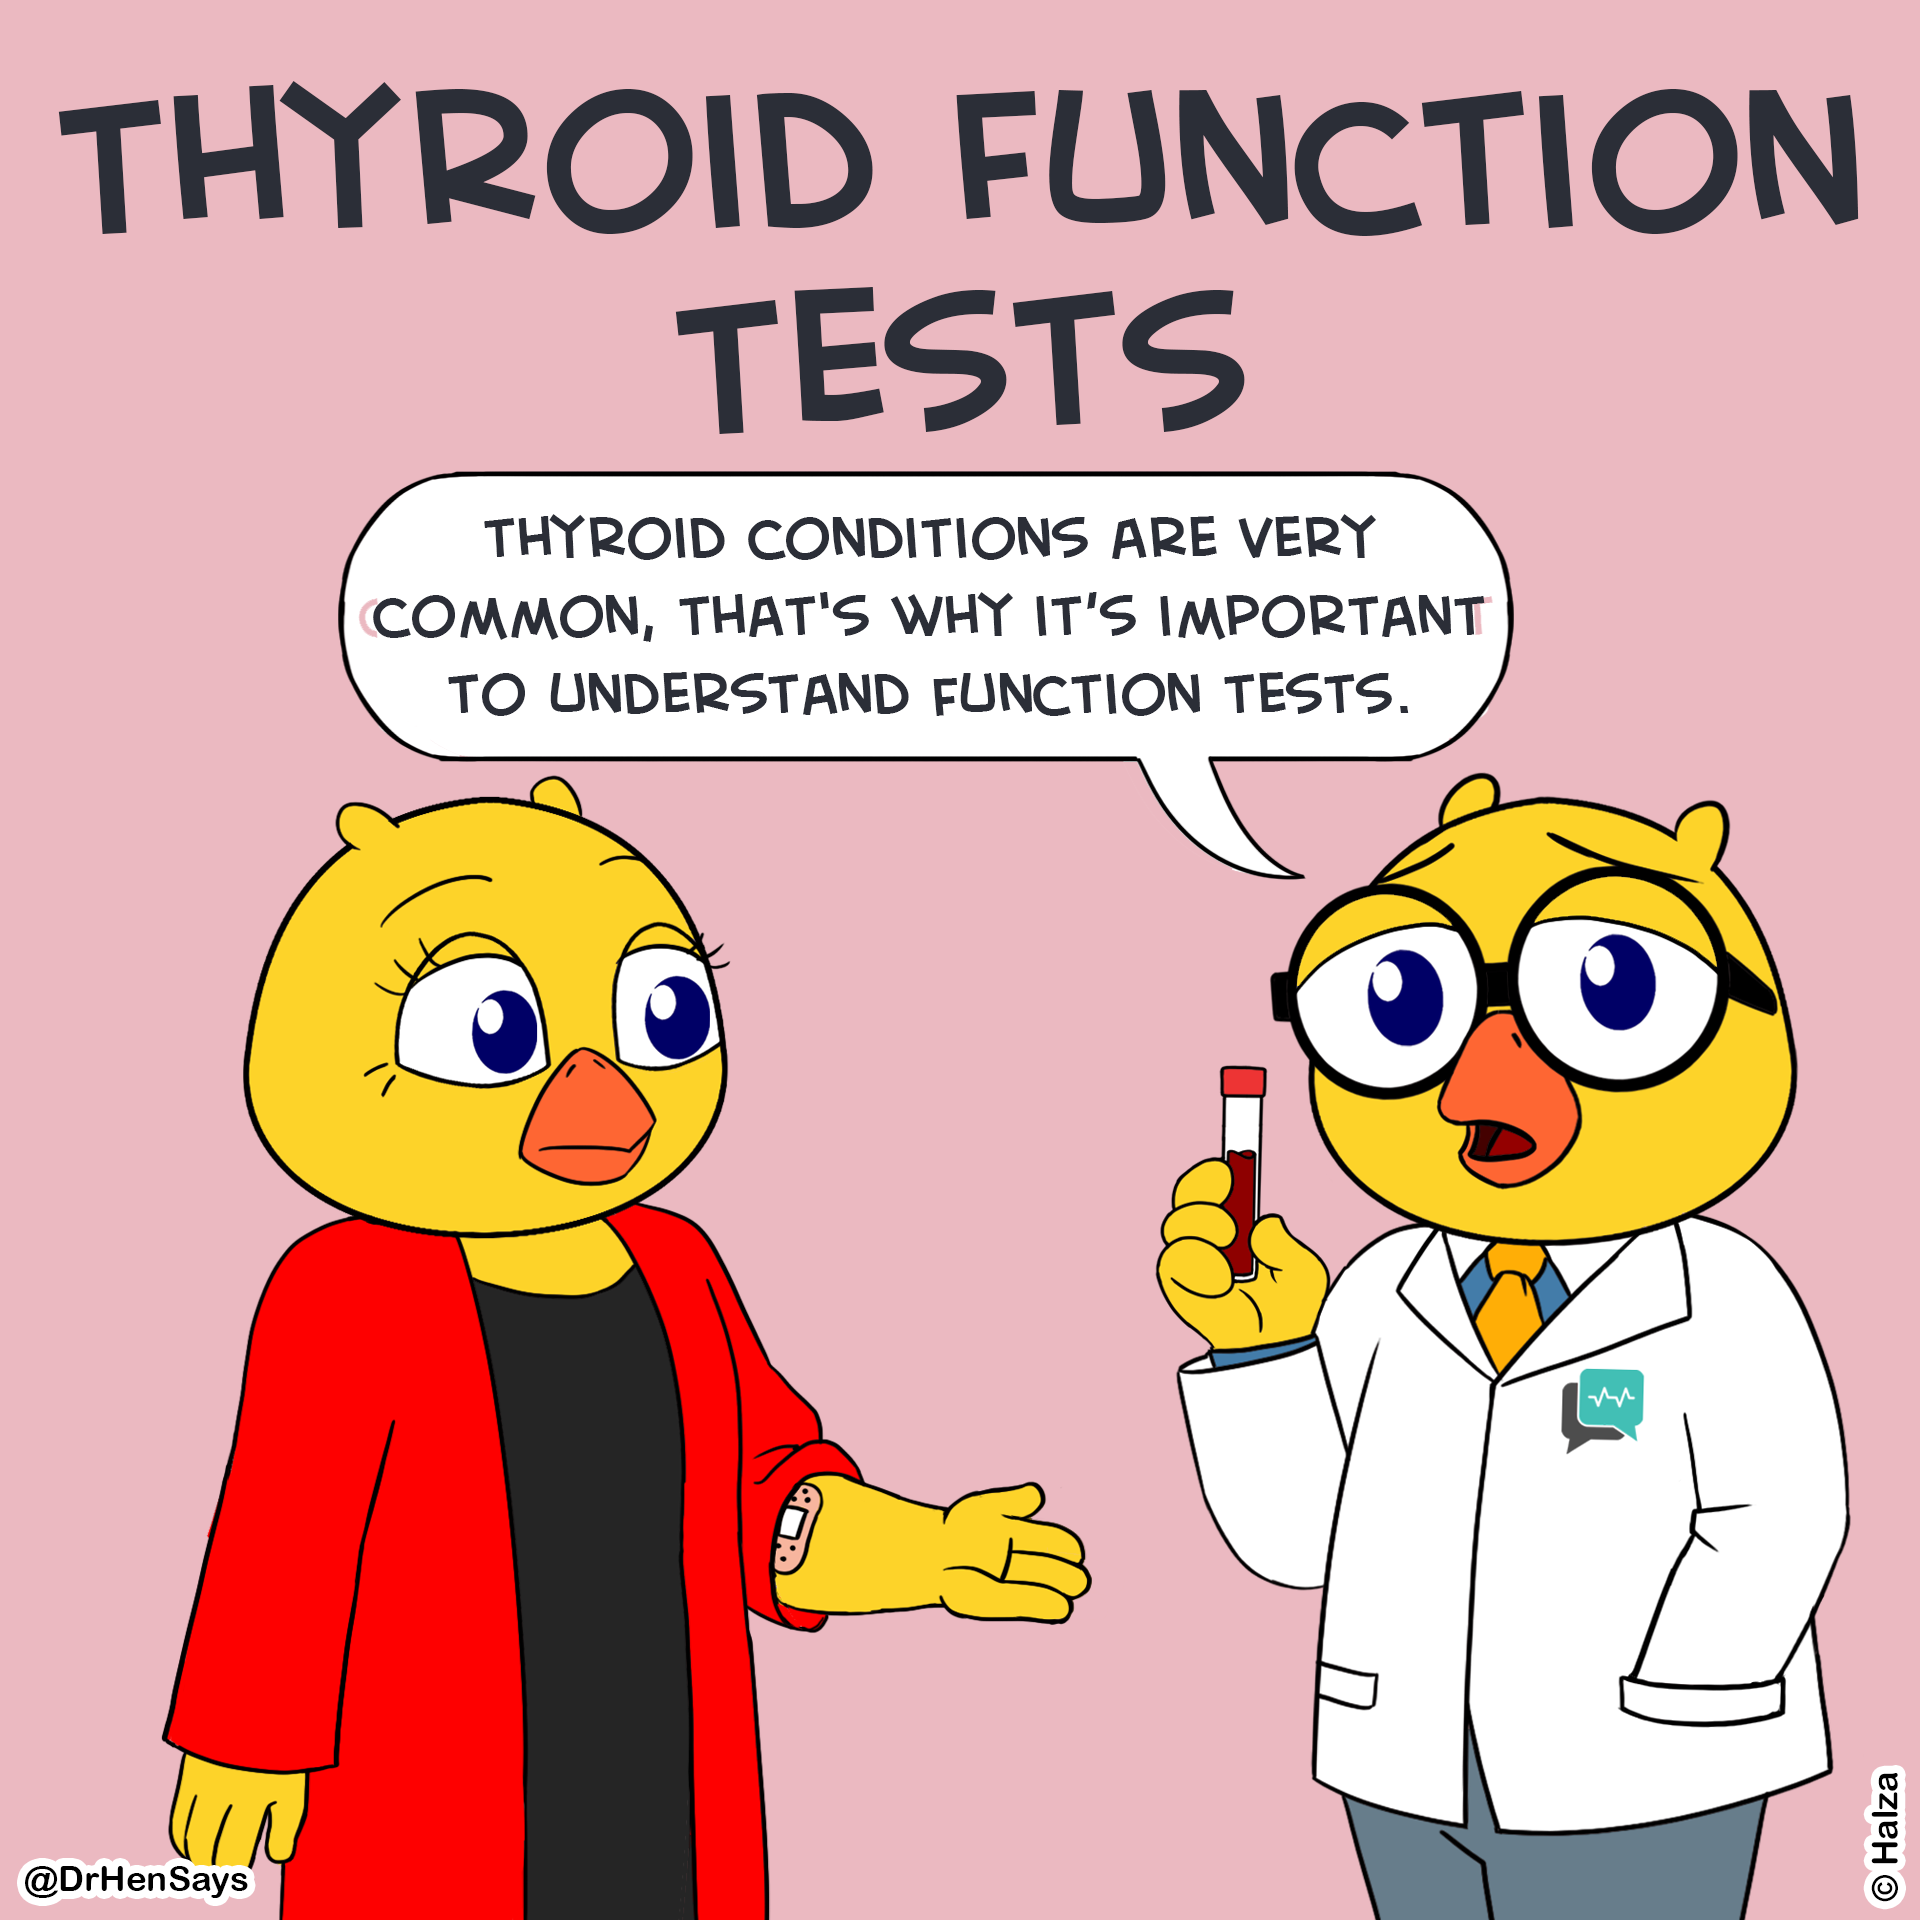 Thyroid Function Tests